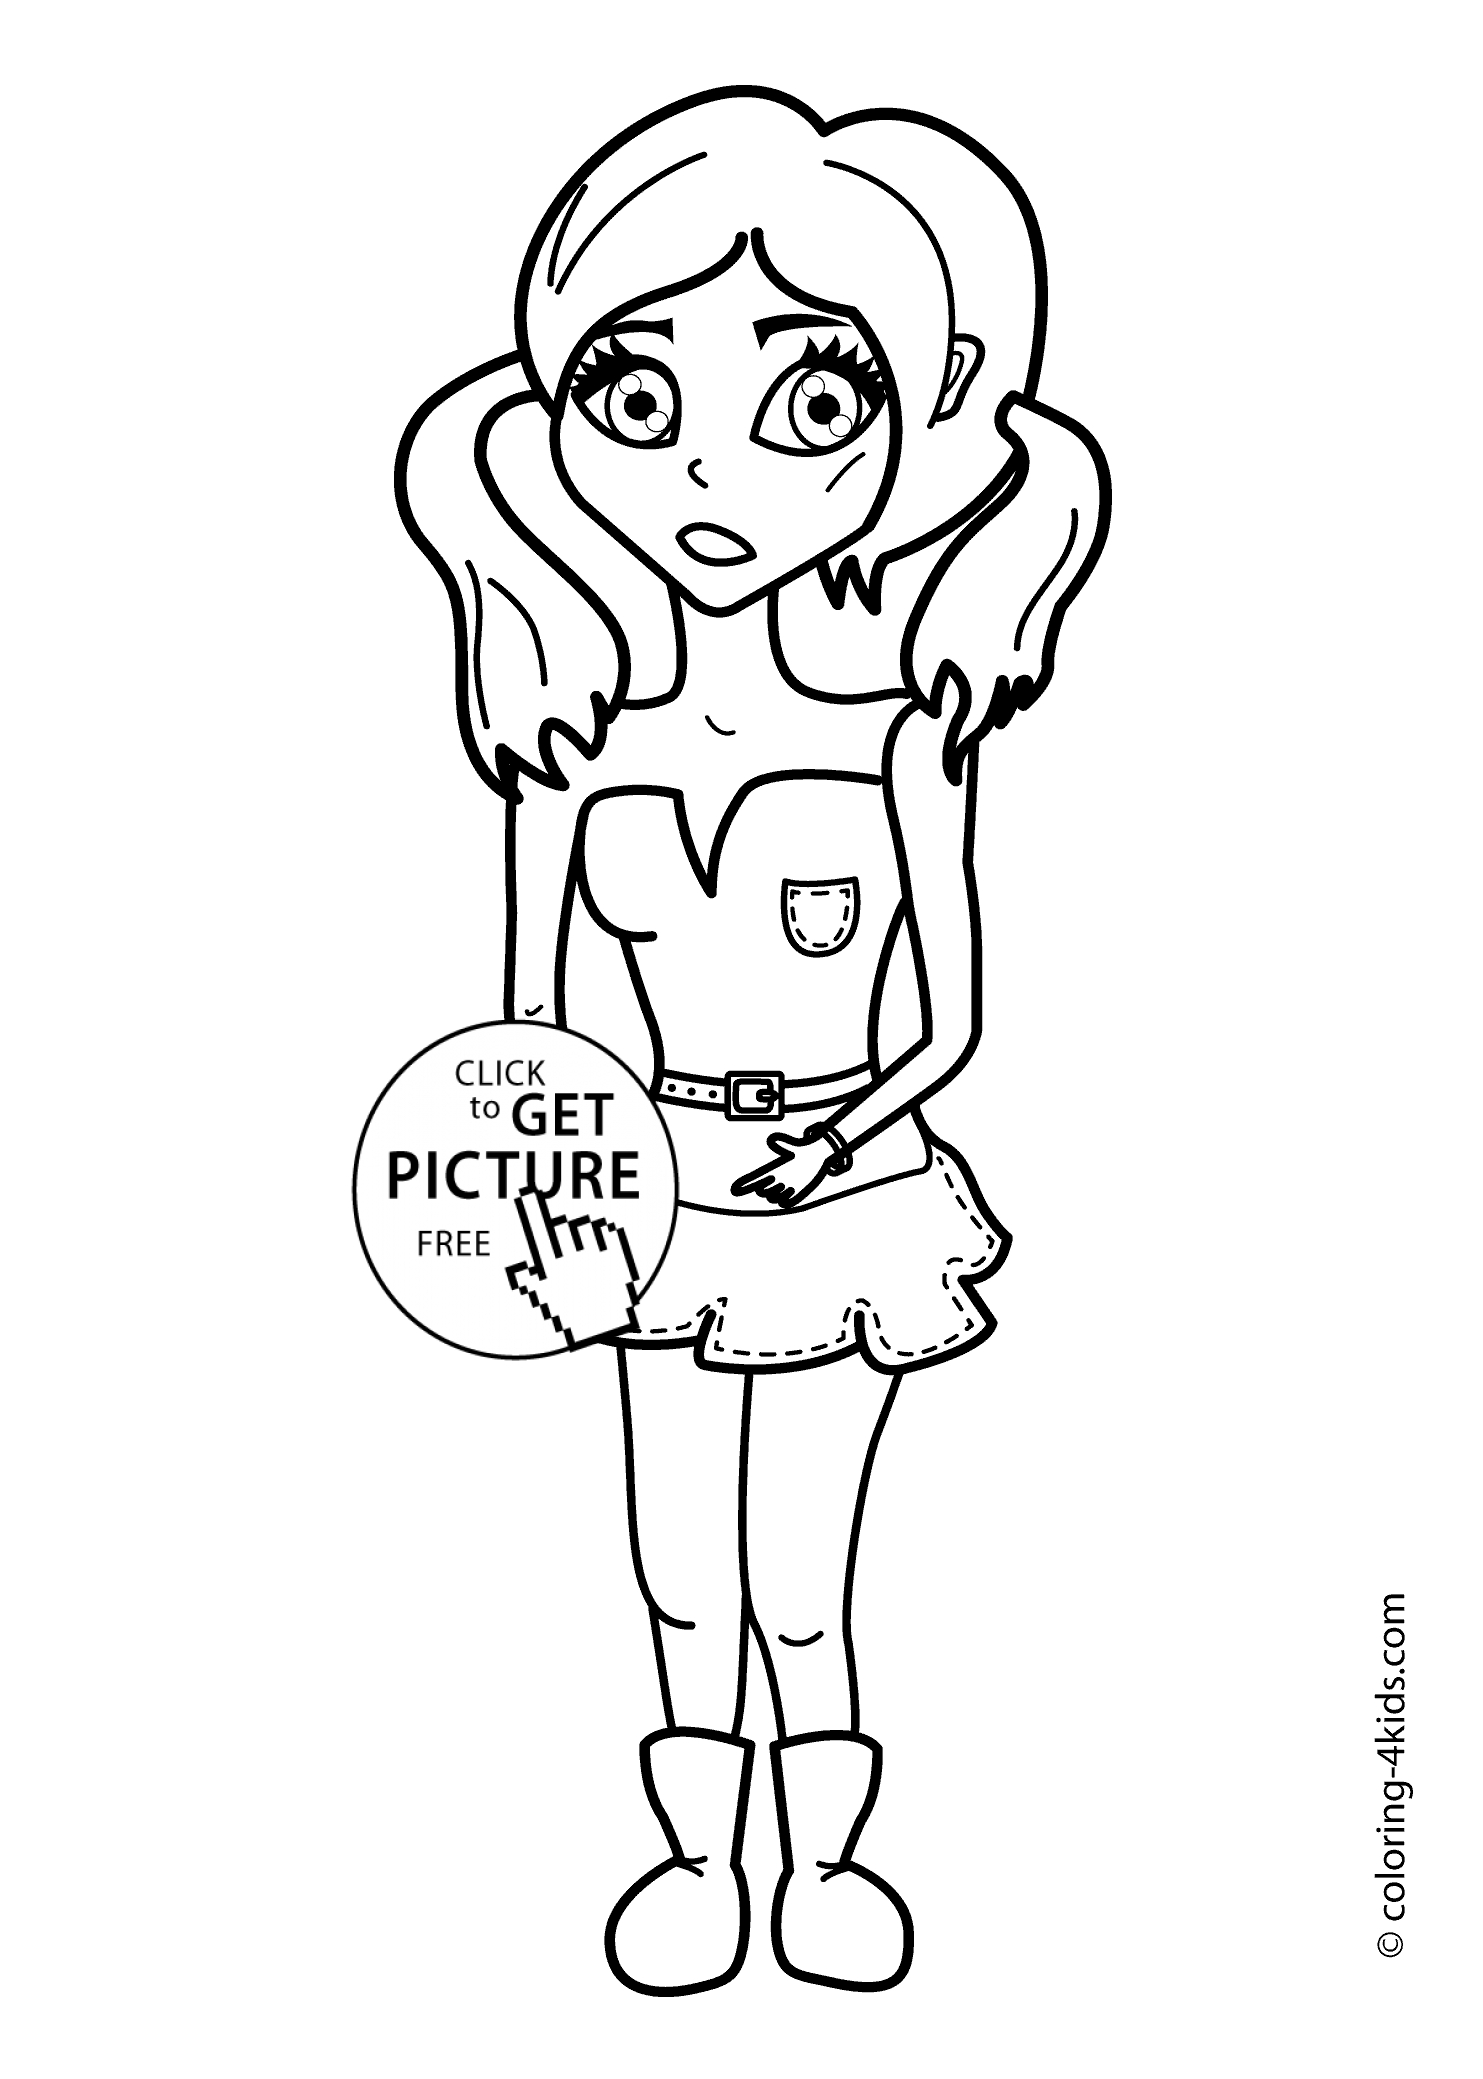 Coloring Page Girl Cute Coloring Pages For Girls Printable Coloring Pages For Kids Free